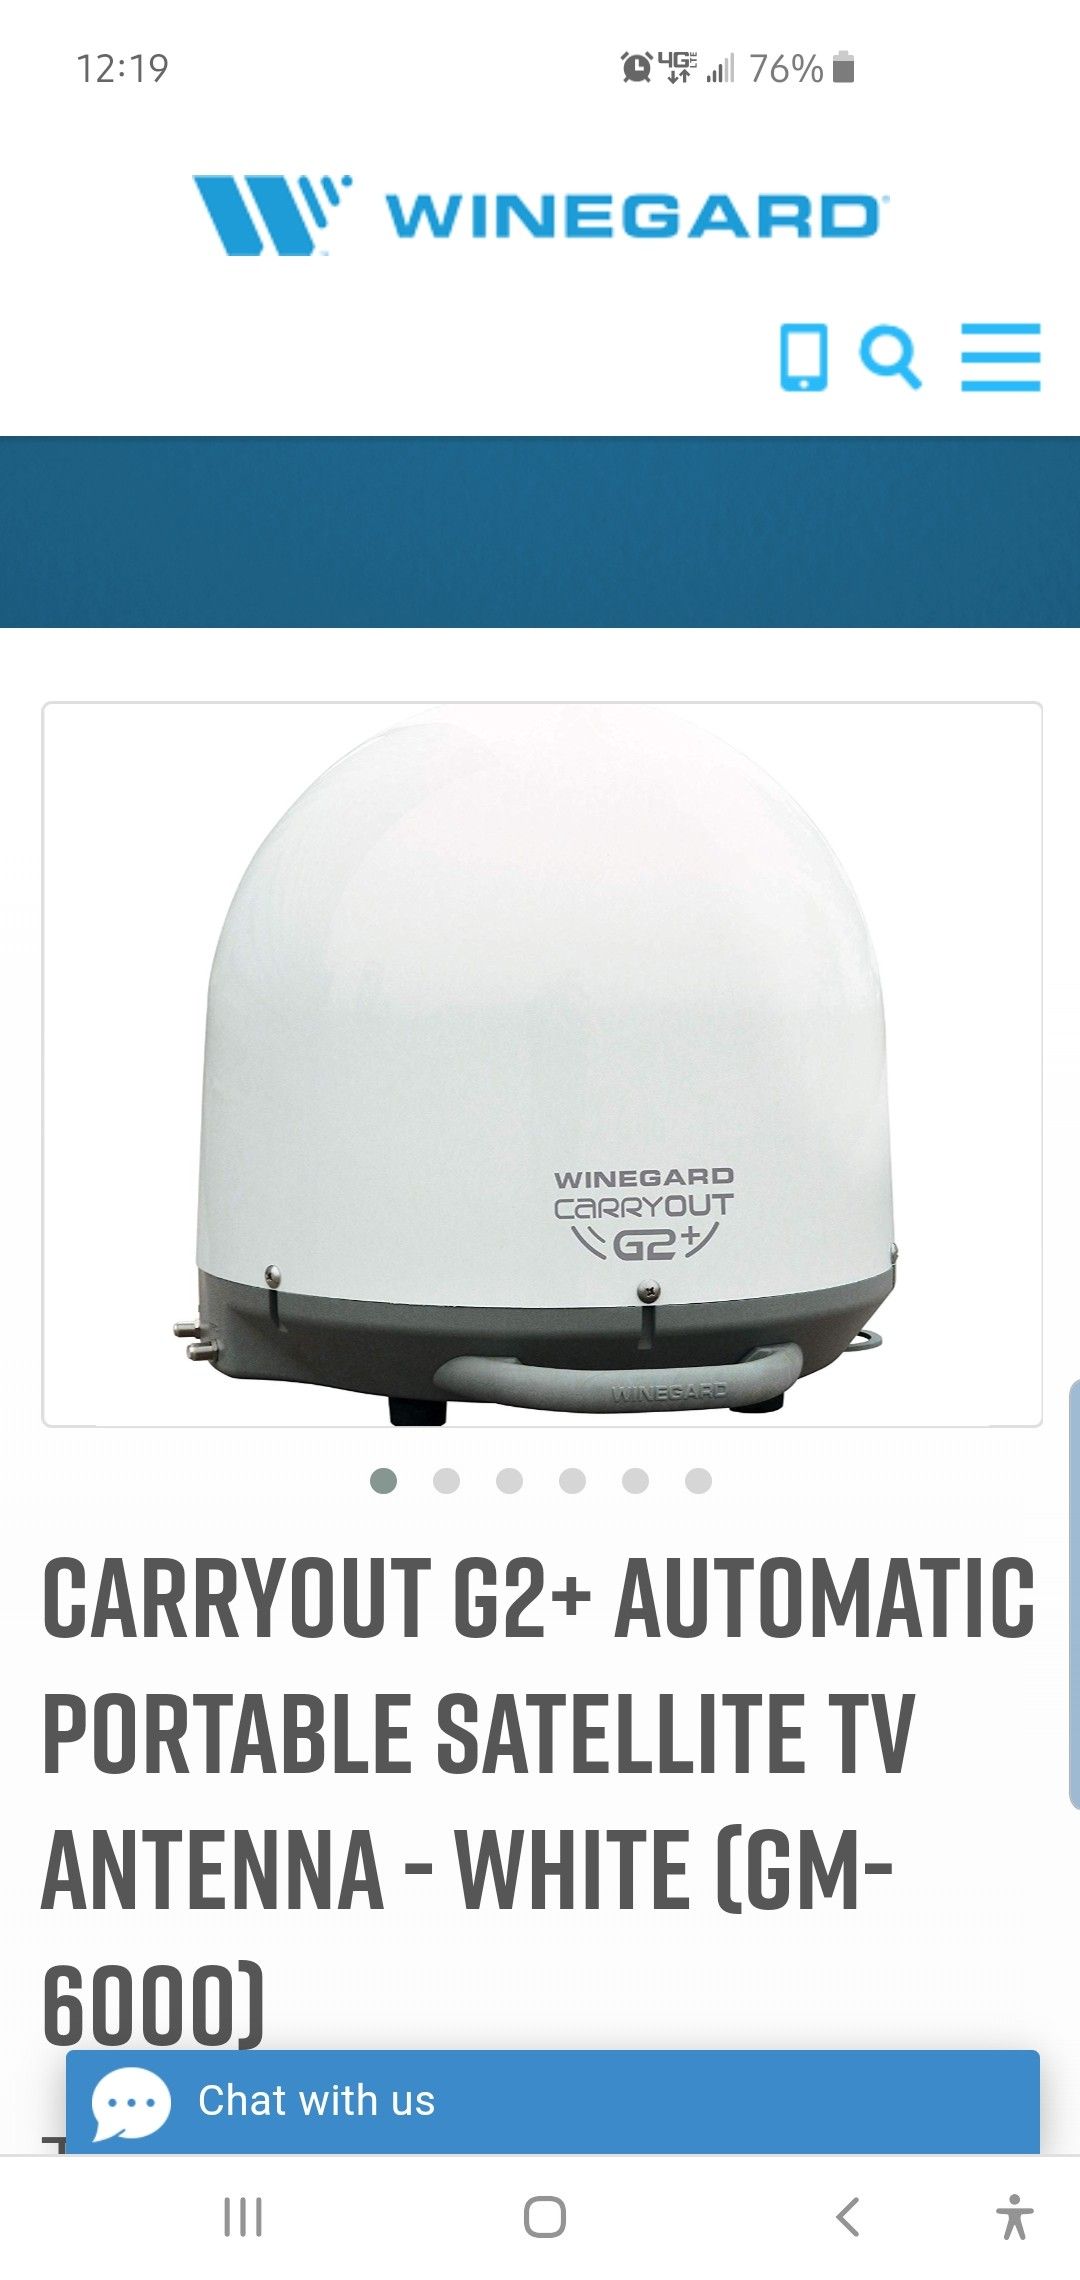 Winegard G2 Carryout